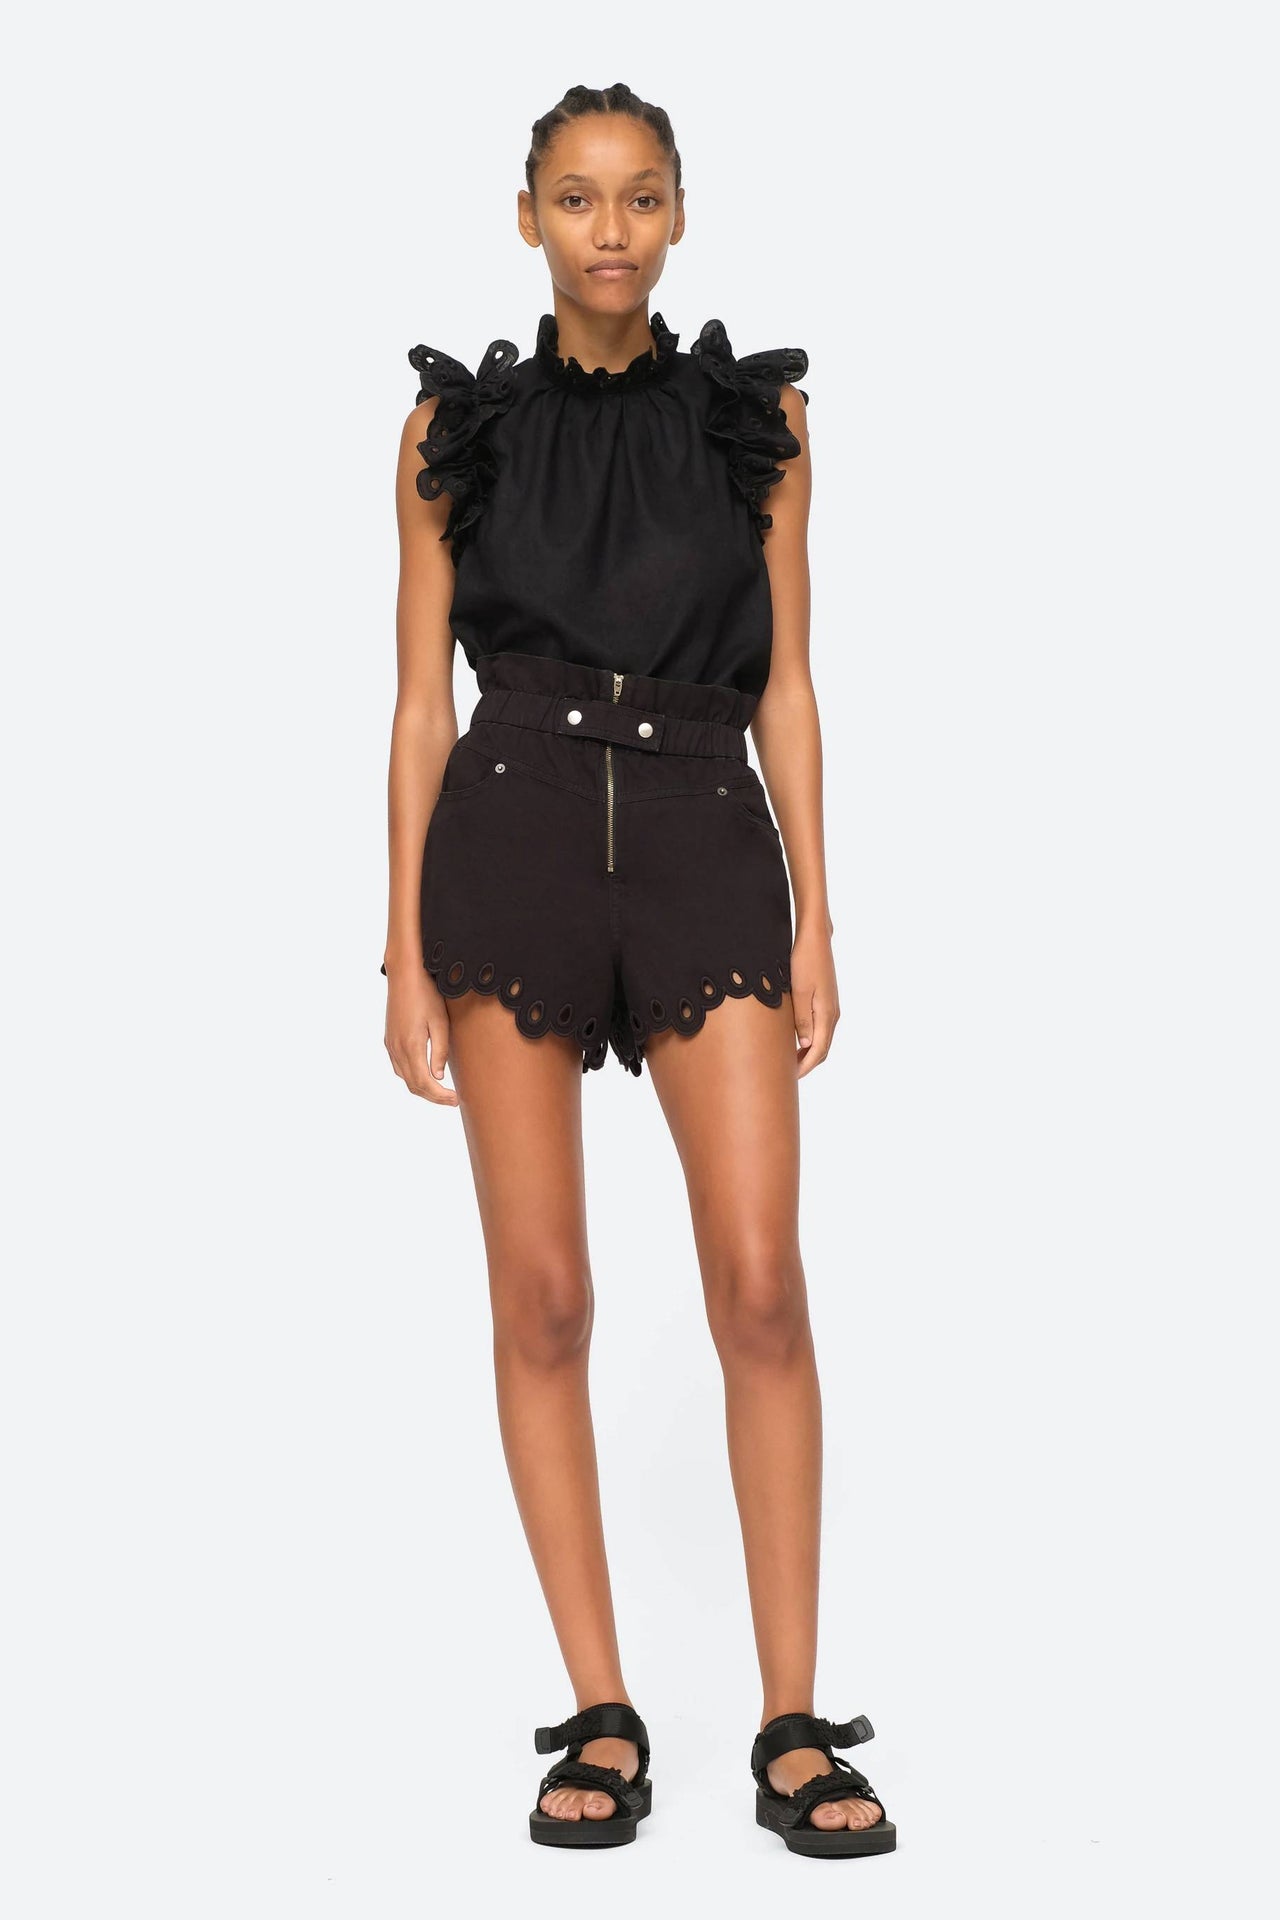 Lee Embroidery Short in Black-Short-Sea New York-Debs Boutique